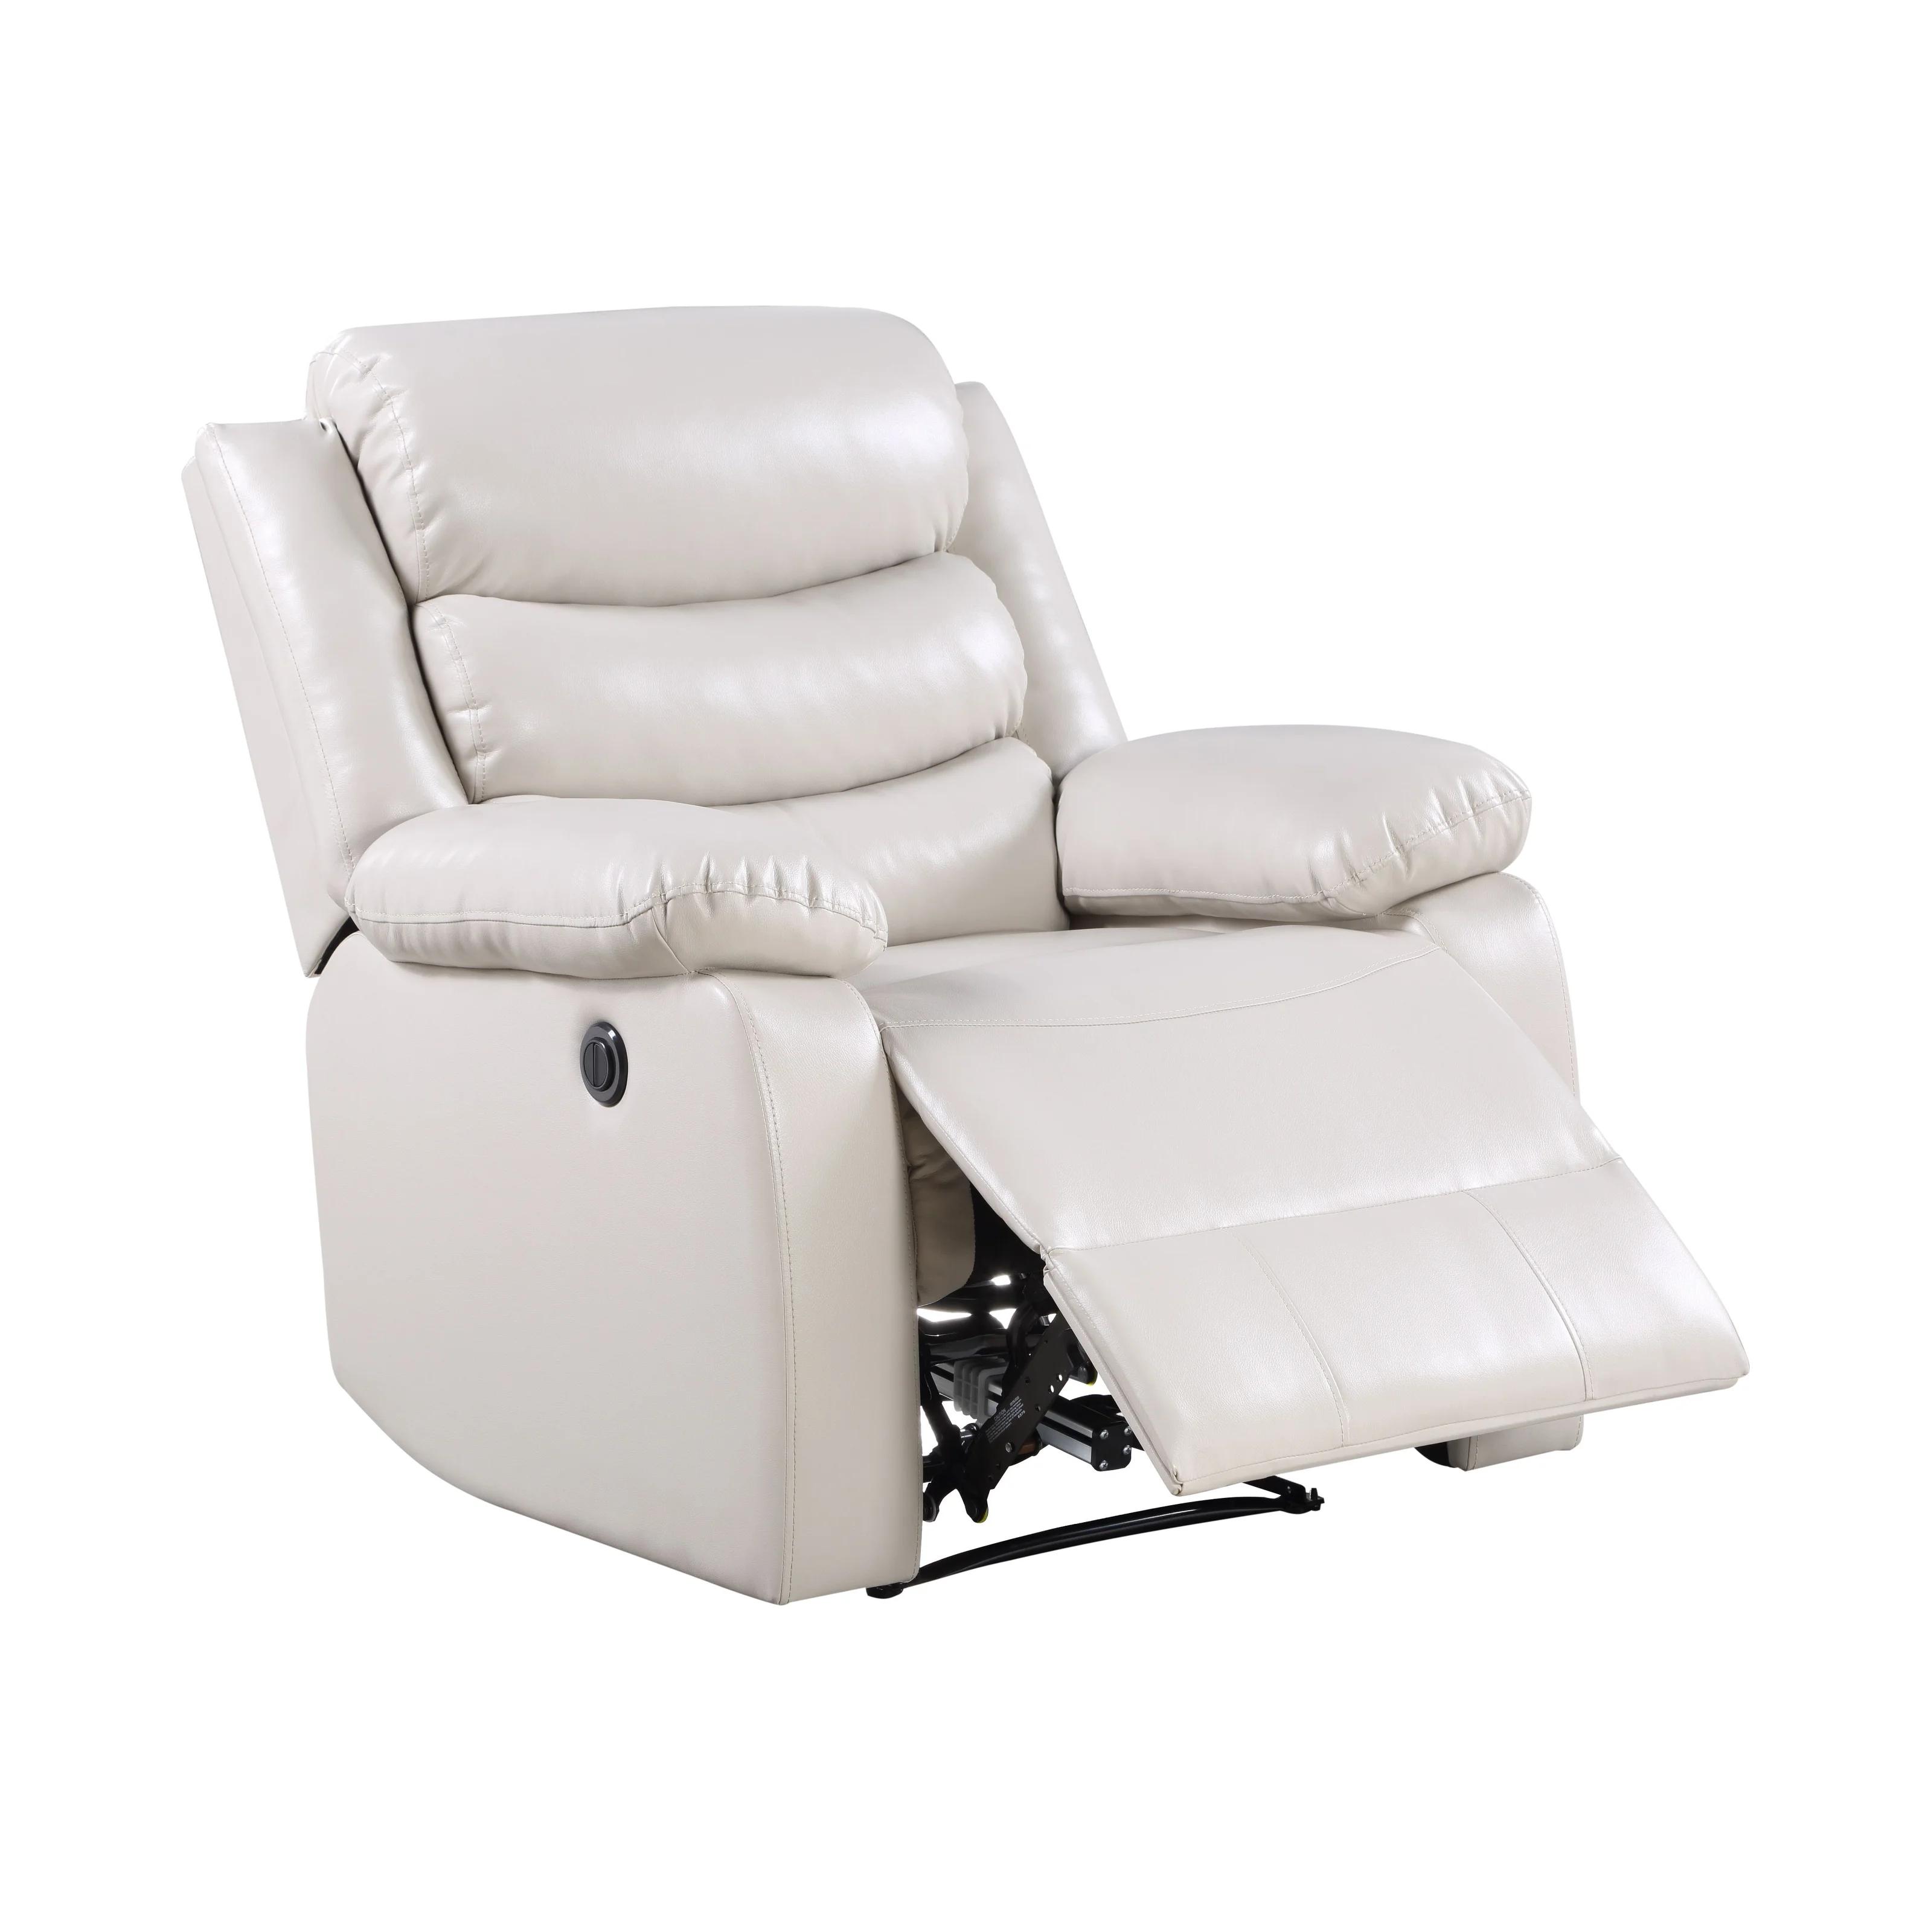 

    
Contemporary White Faux Leather PU Recliner by Acme Eilbra 56911
